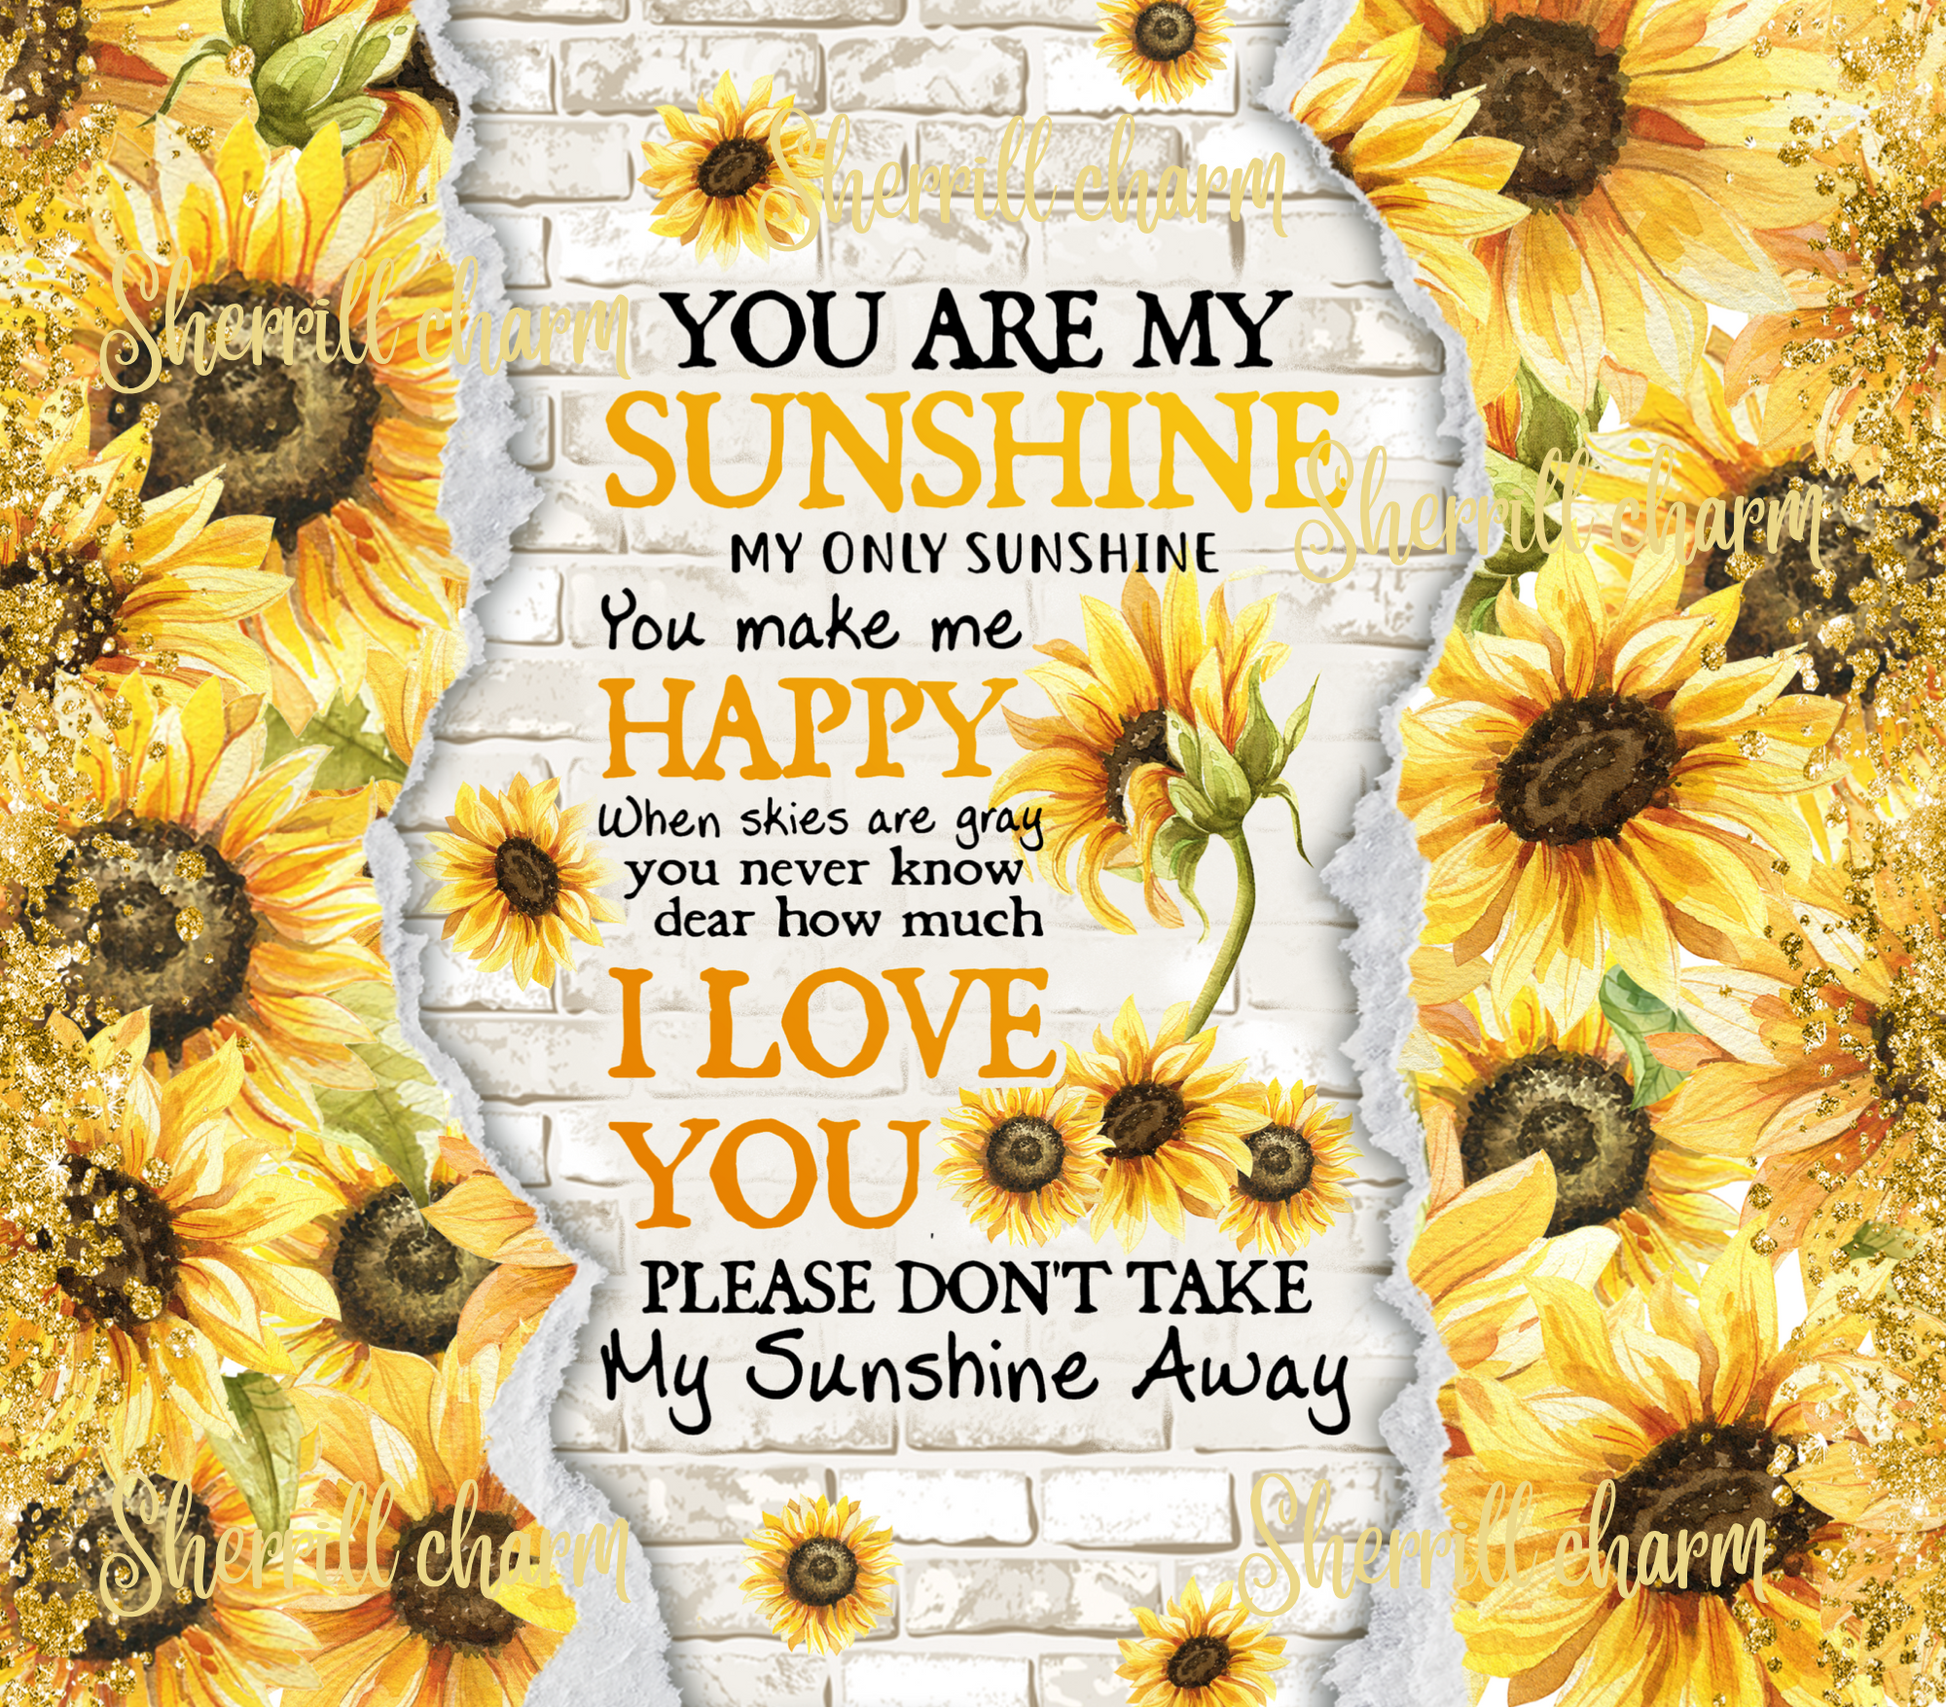 CGE You are My Sunshine Lyrics  The Center for Great Expectations